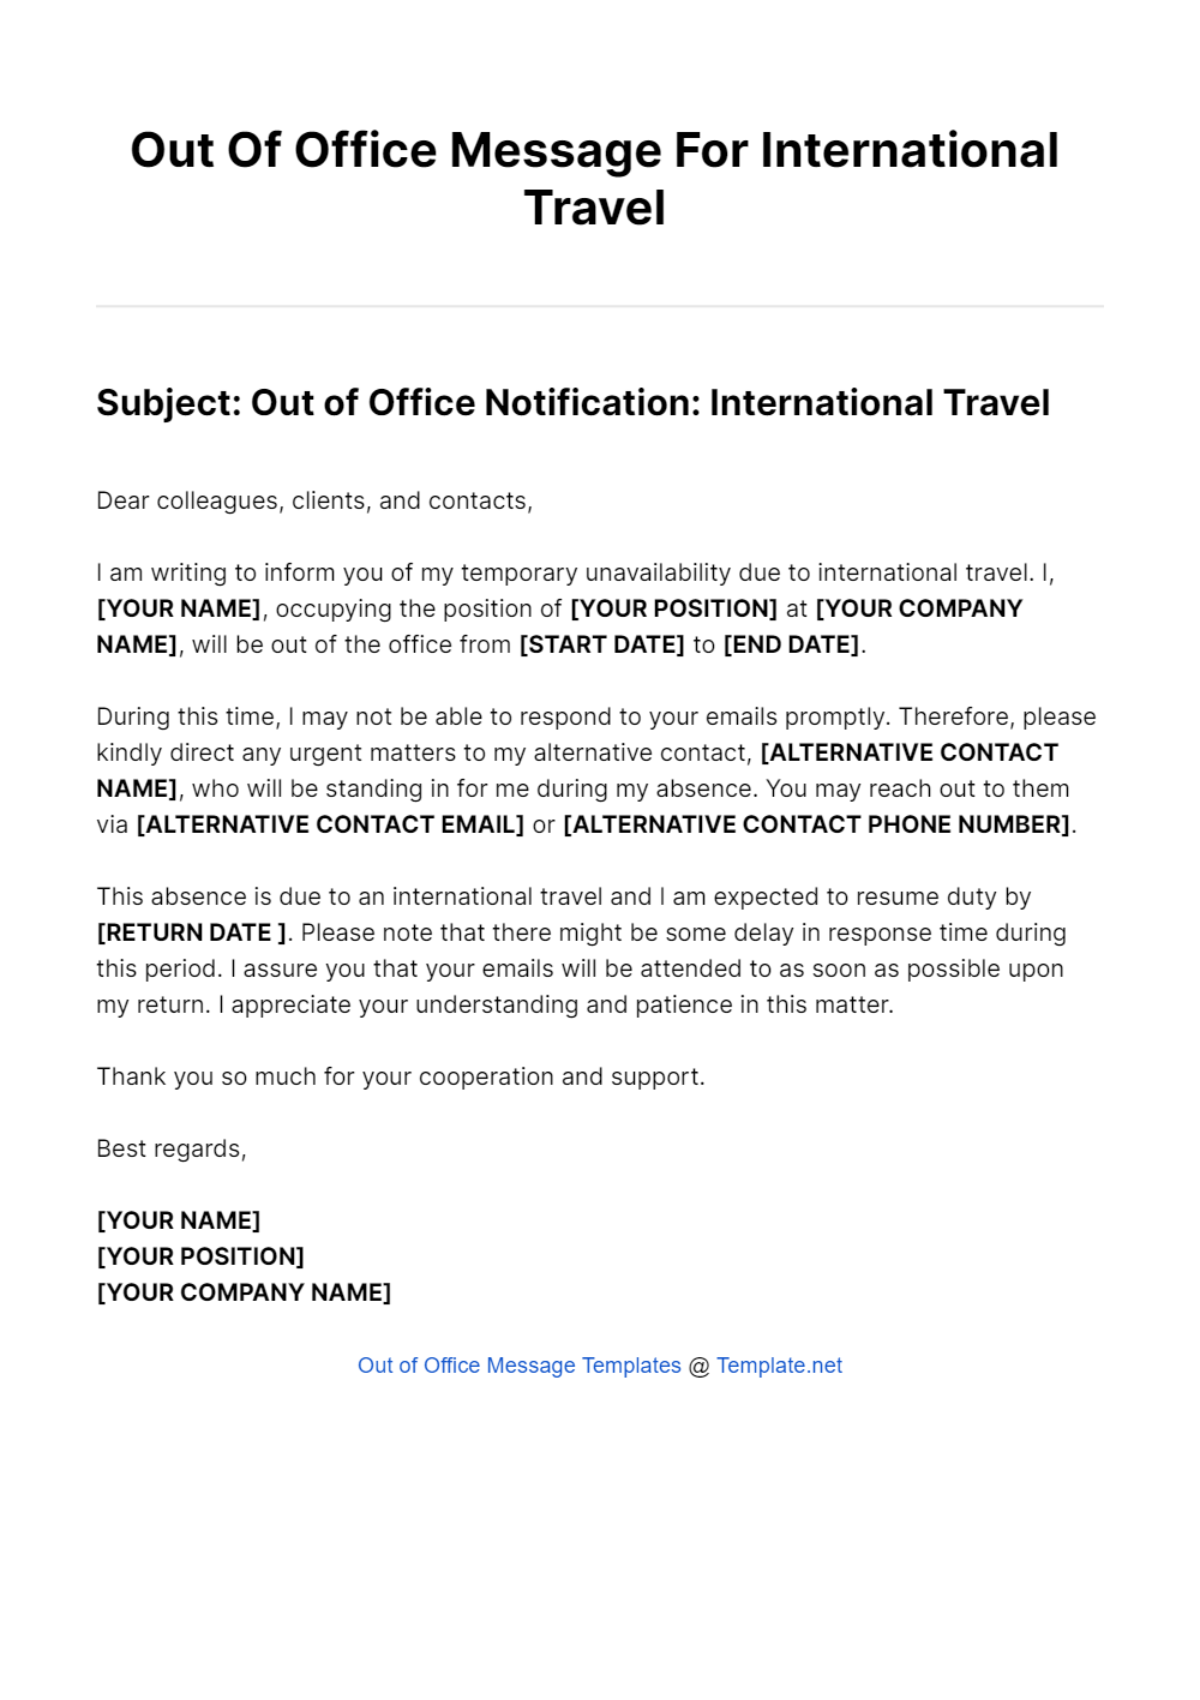 Out Of Office Message For International Travel Template